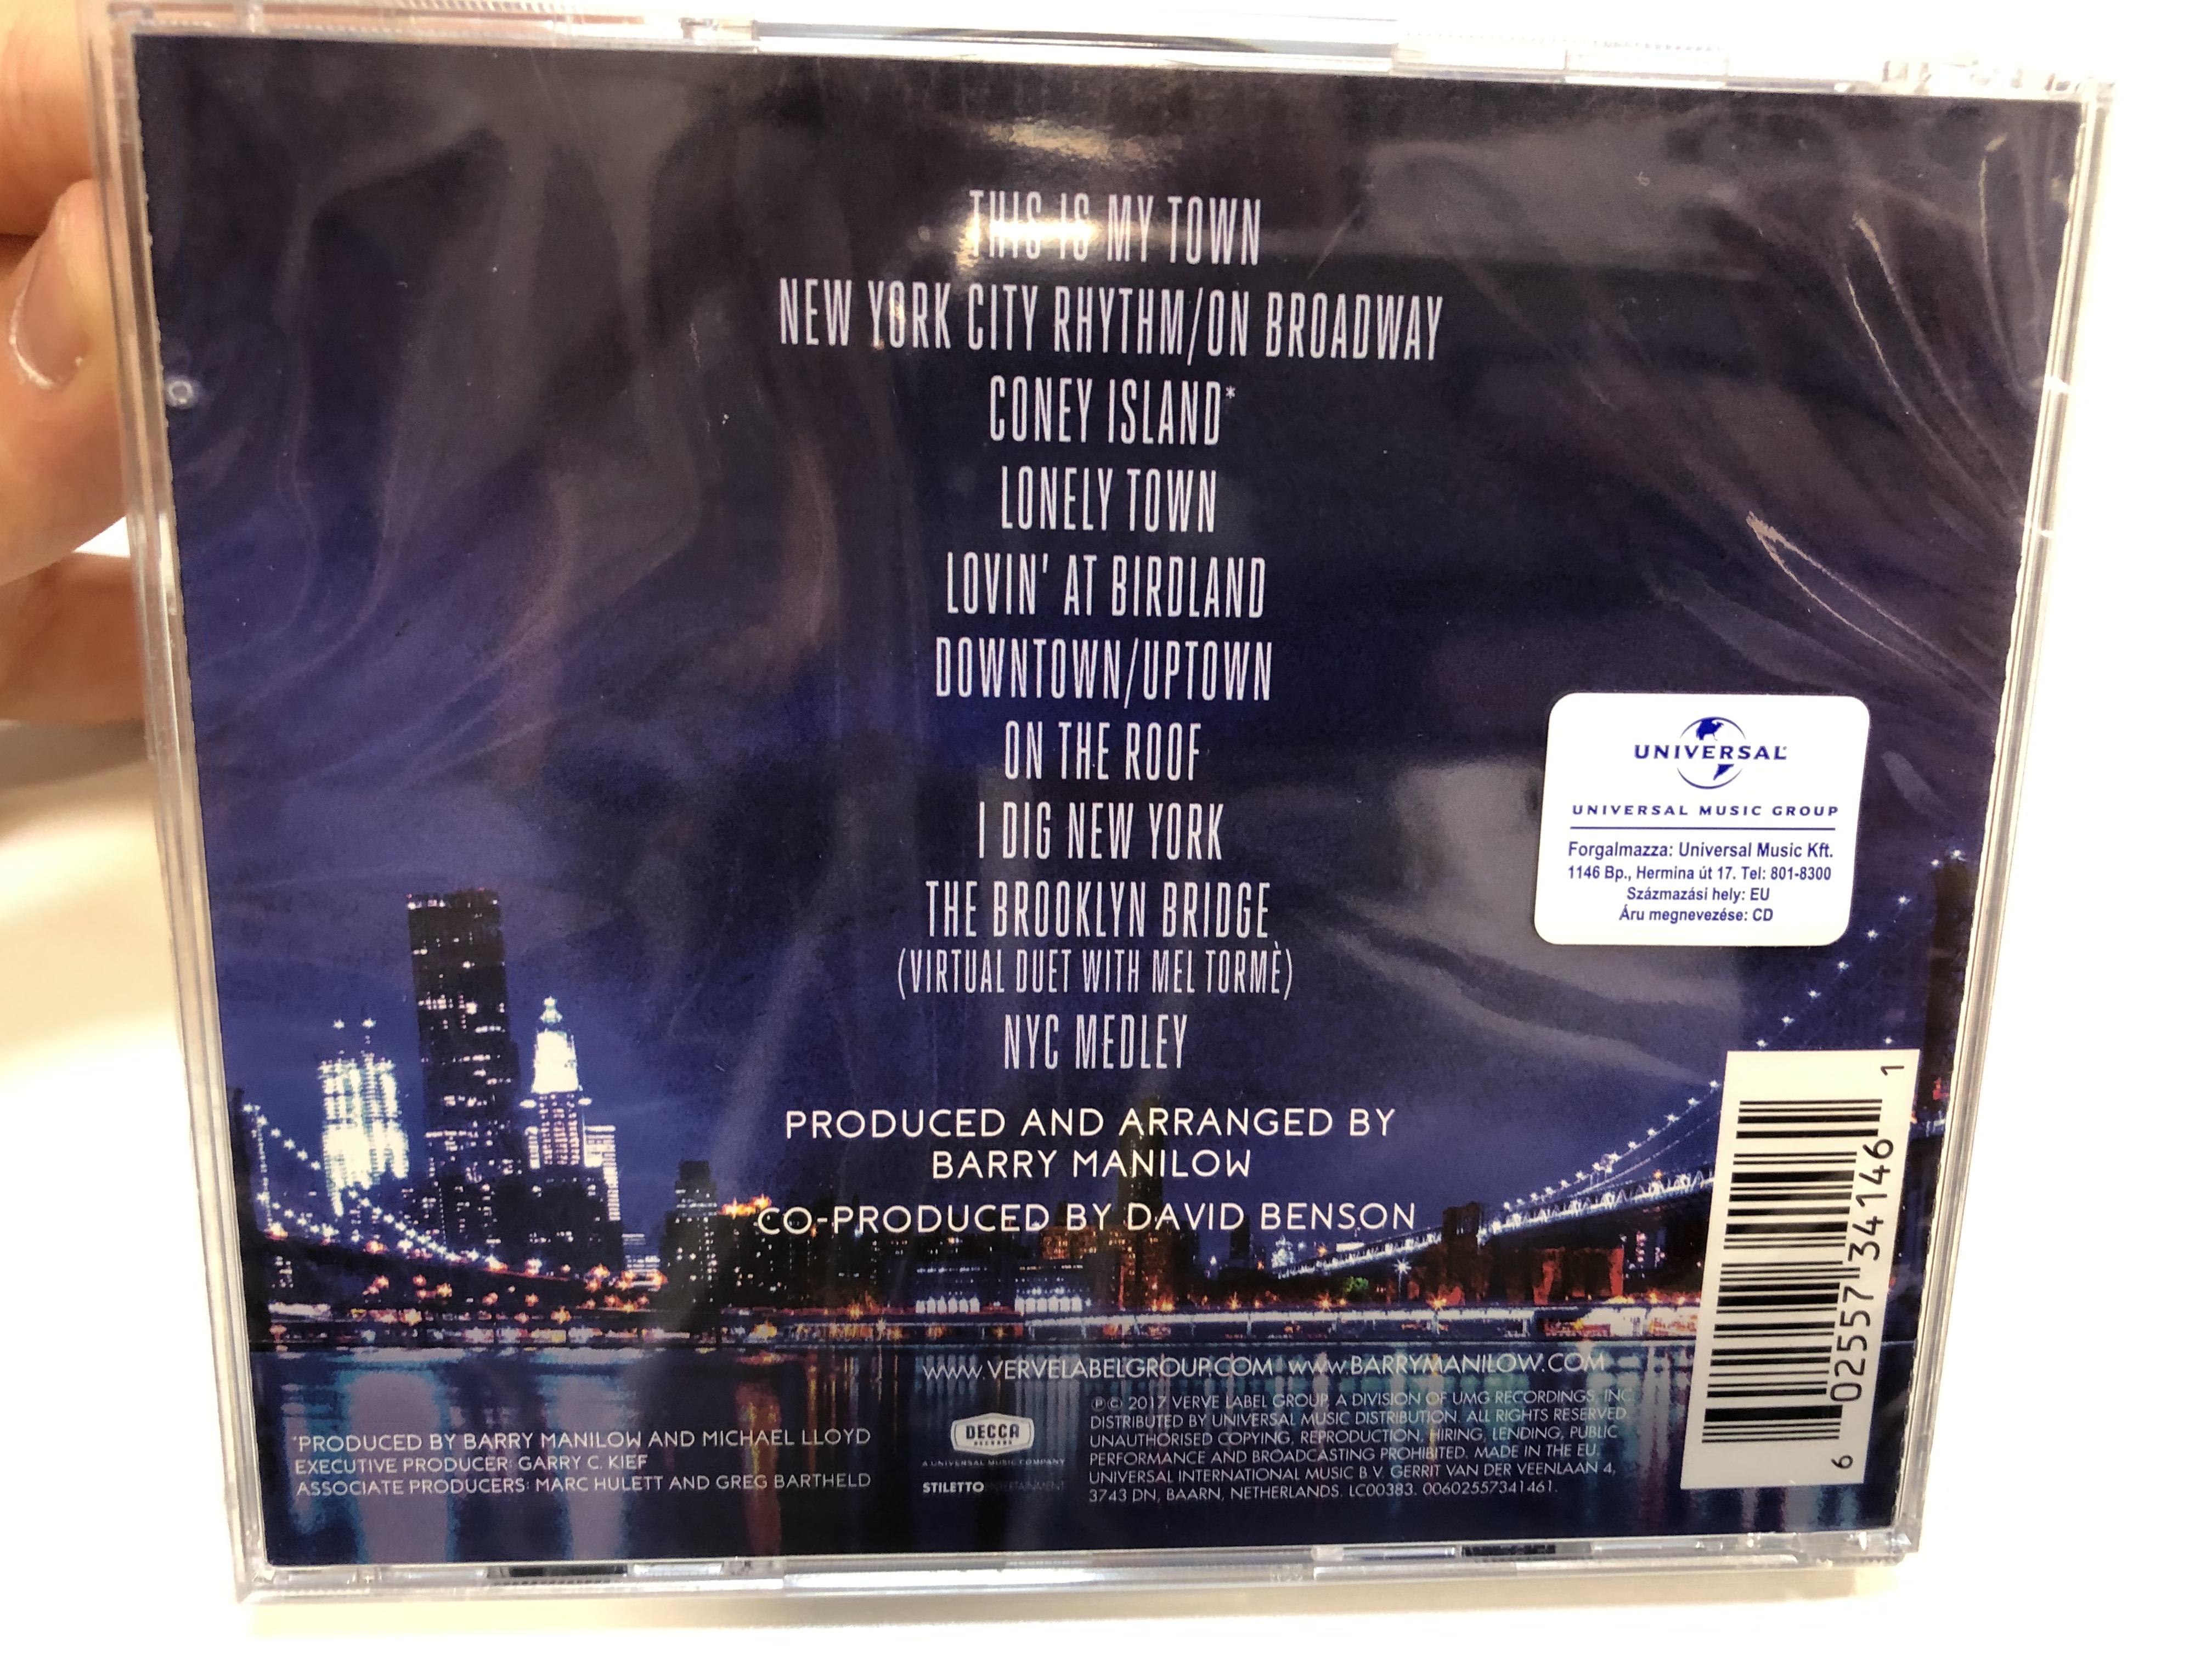 barry-manilow-this-is-my-town-songs-of-new-york-decca-audio-cd-2017-00602557341461-3-.jpg